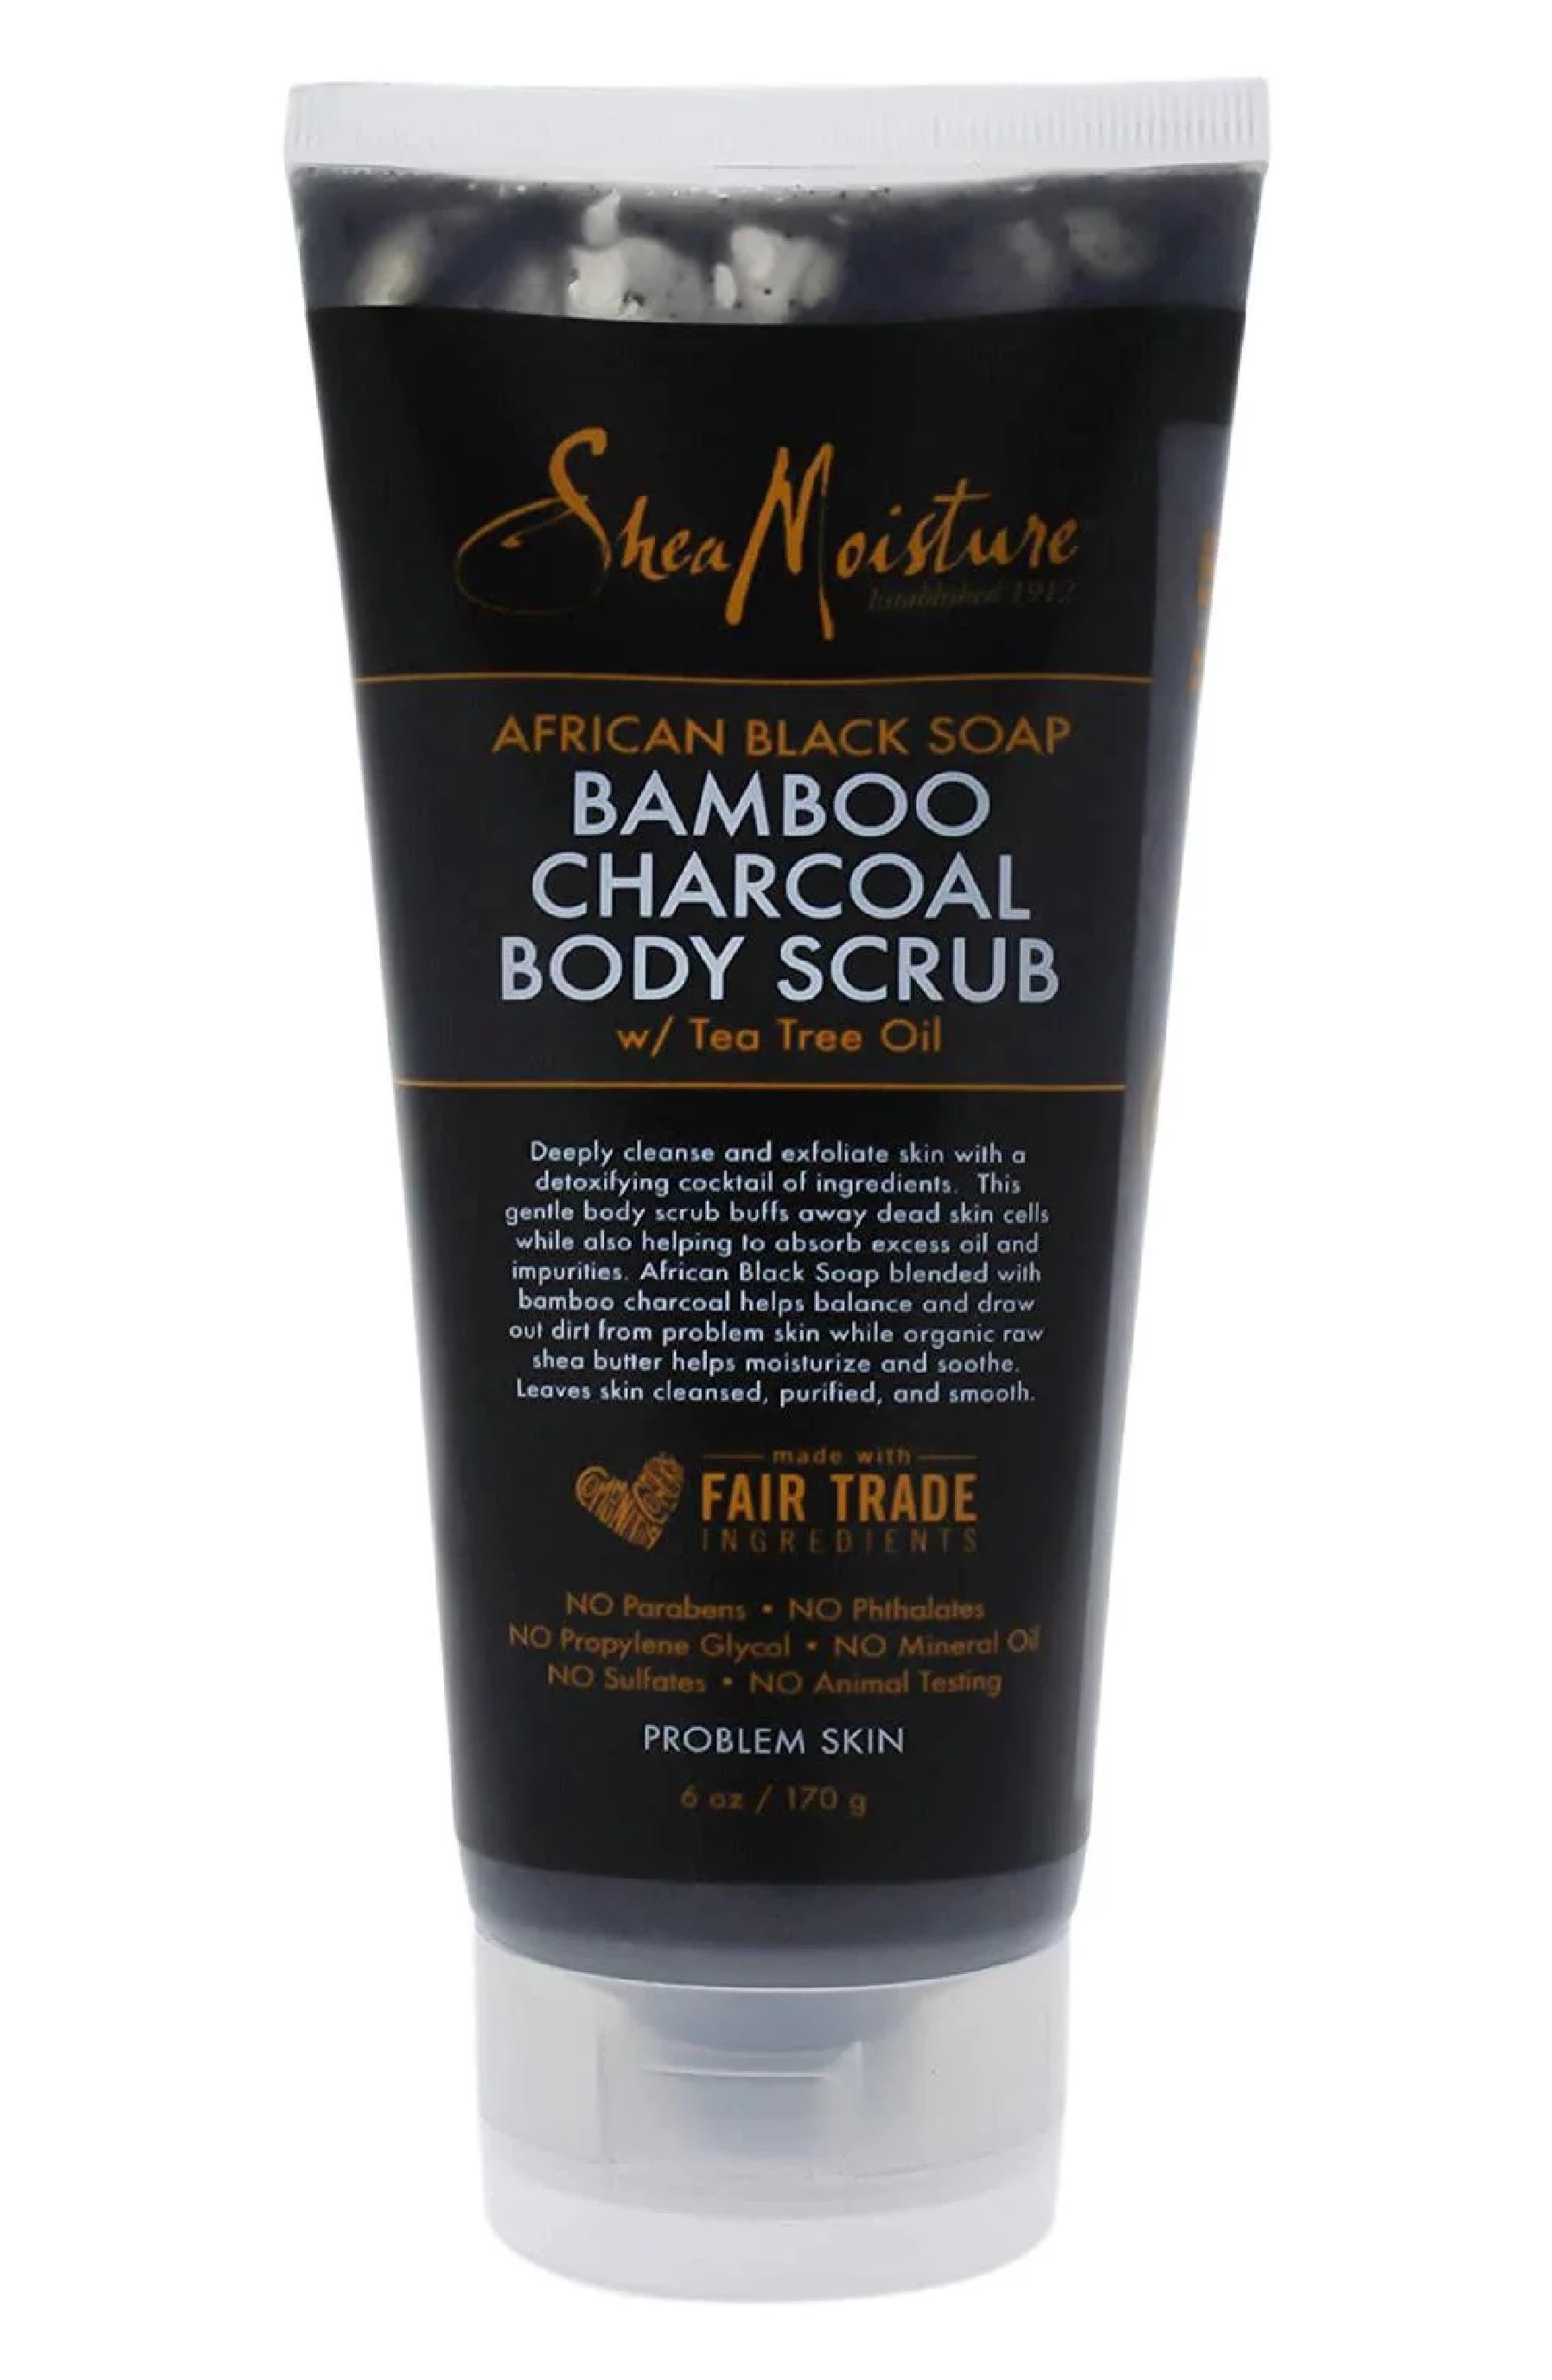 African Black Soap Bamboo Charcoal Body Scrub with Tea Tree Oil She